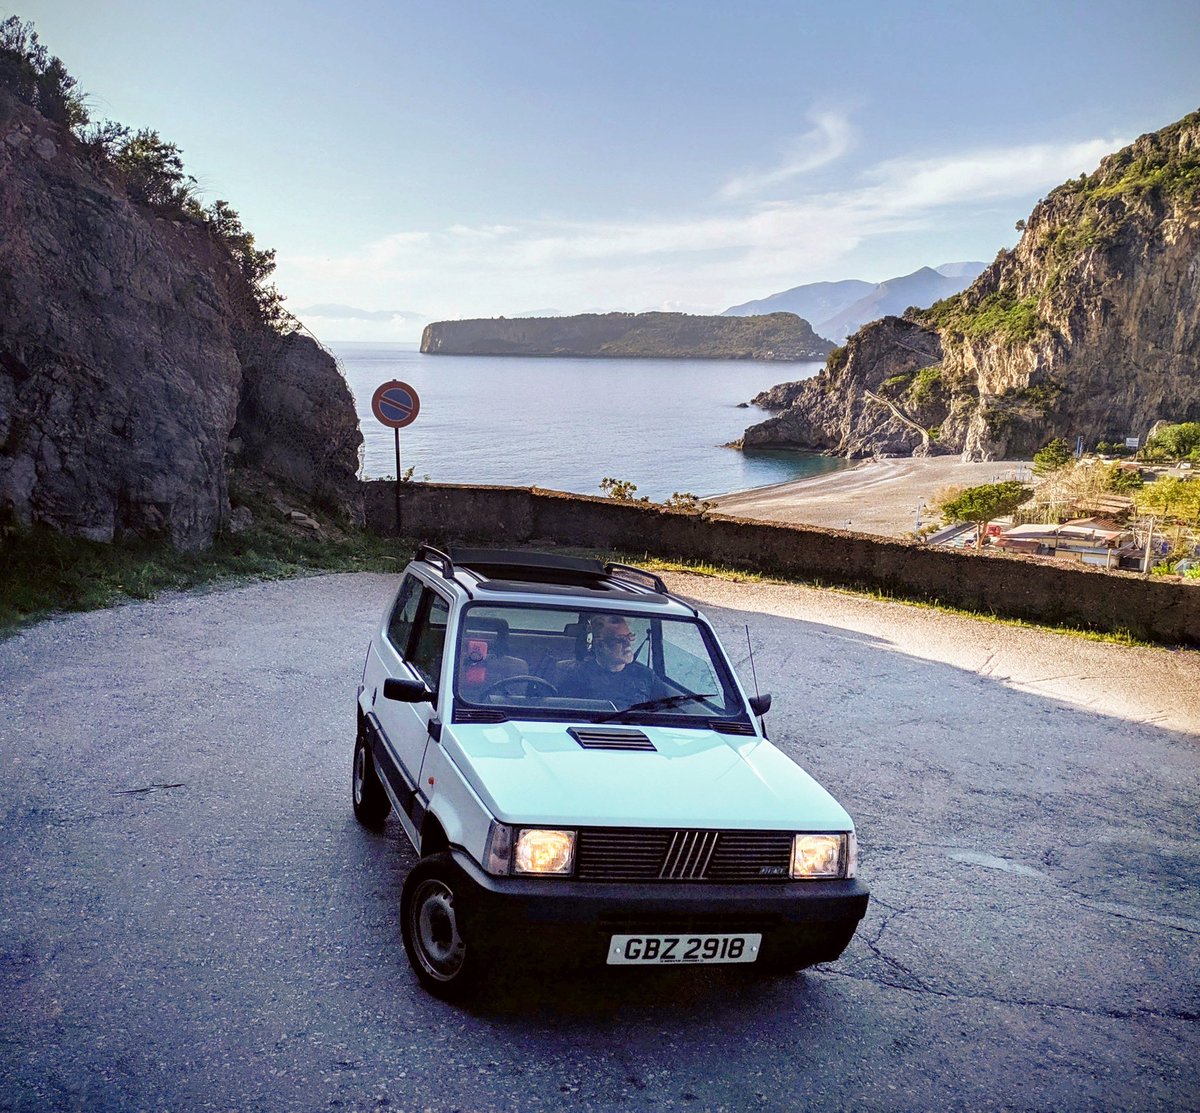 #DriveItDay with the Panda and the Current Mr Magill was to the beach as San Nicola Arcella #GCCG